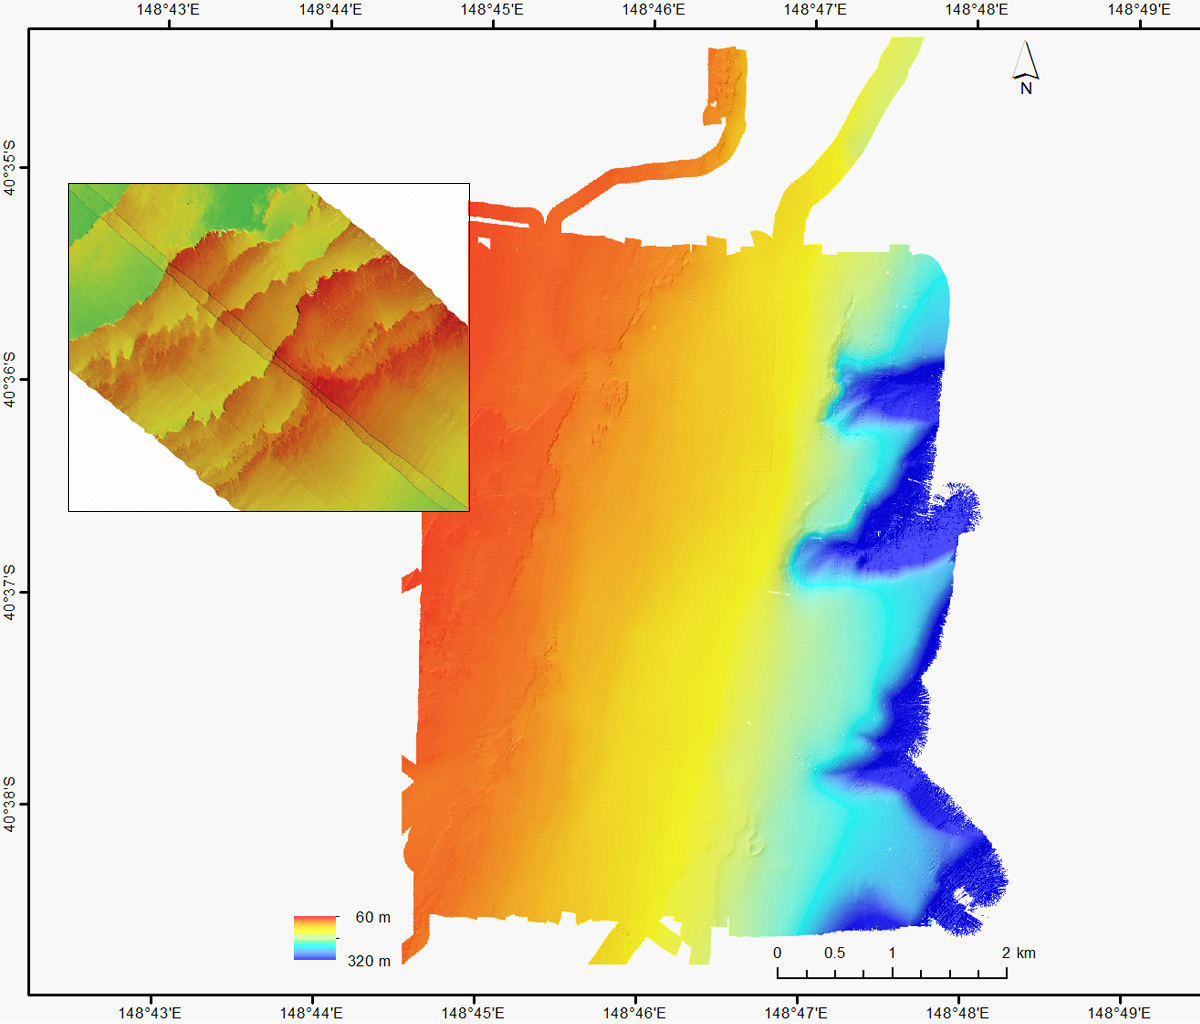 Bathymetry image showing areas of reef, sediment and canyons at Flinders Marine Park